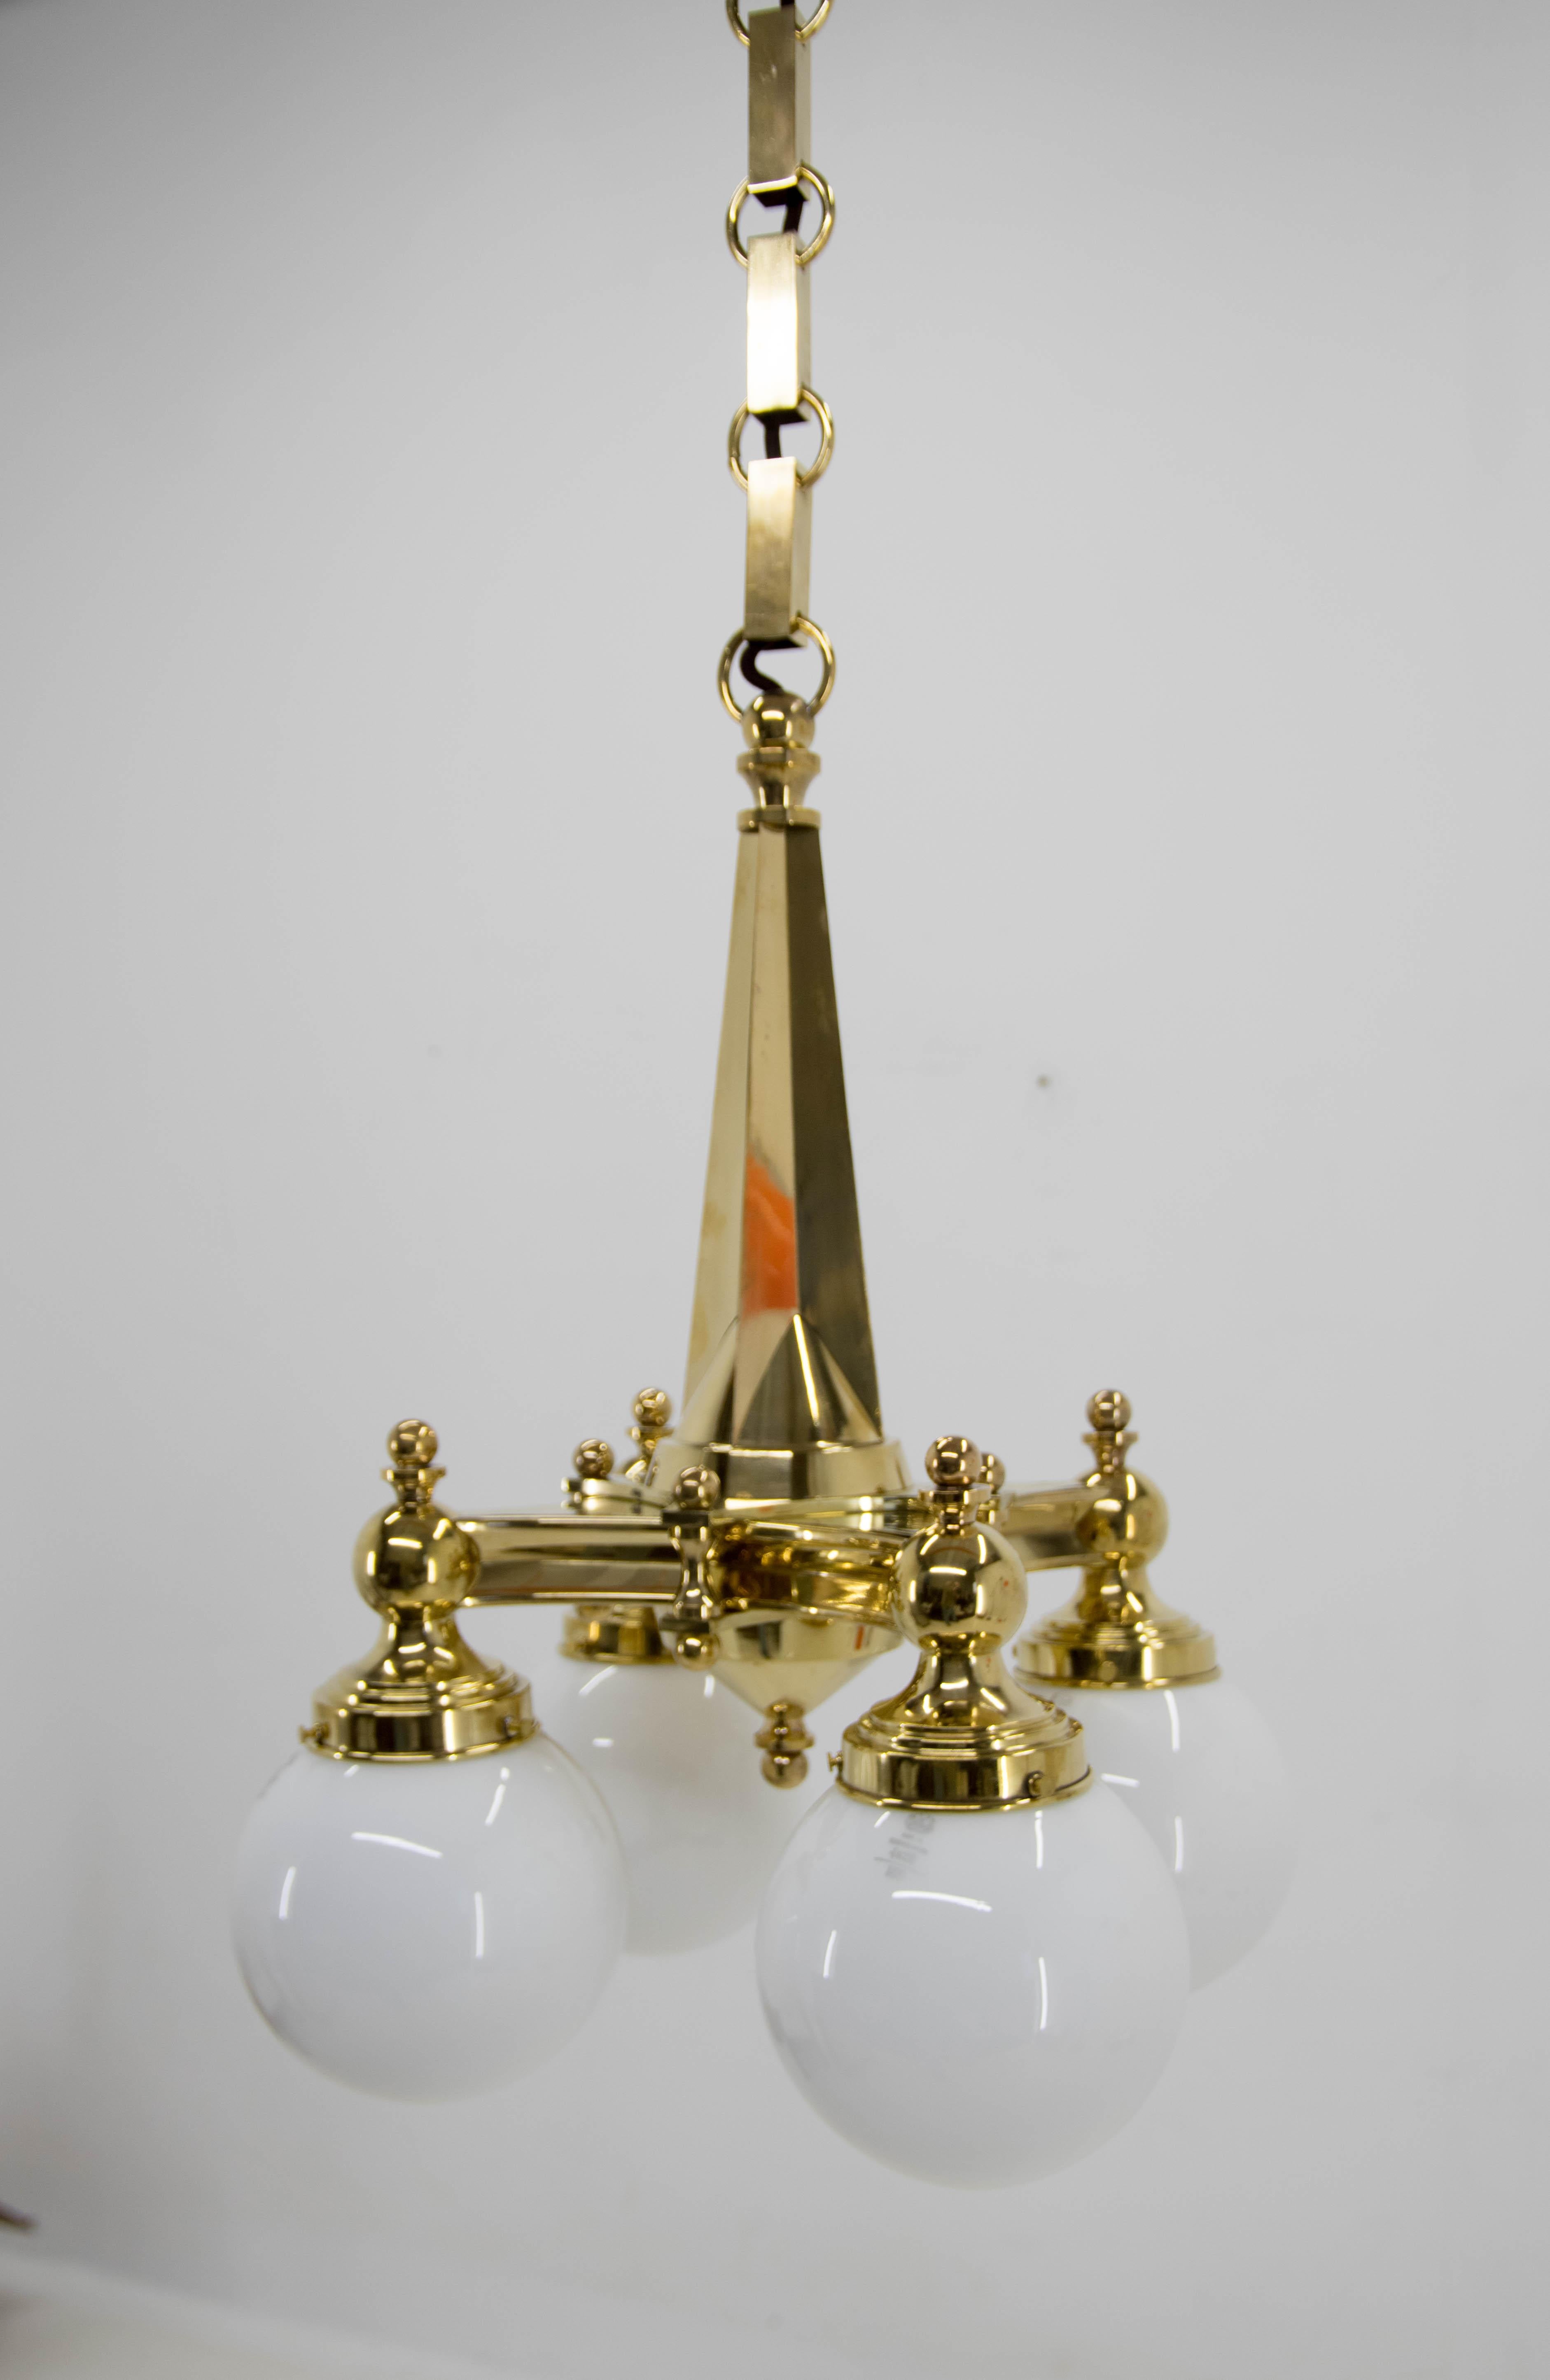 Art Deco 4-flamming chandelier in perfect condition. Chain can be shortened on request.
Polished, rewired
Original marked glass
4x40W, E25-E27 bulbs
US wiring compatible.